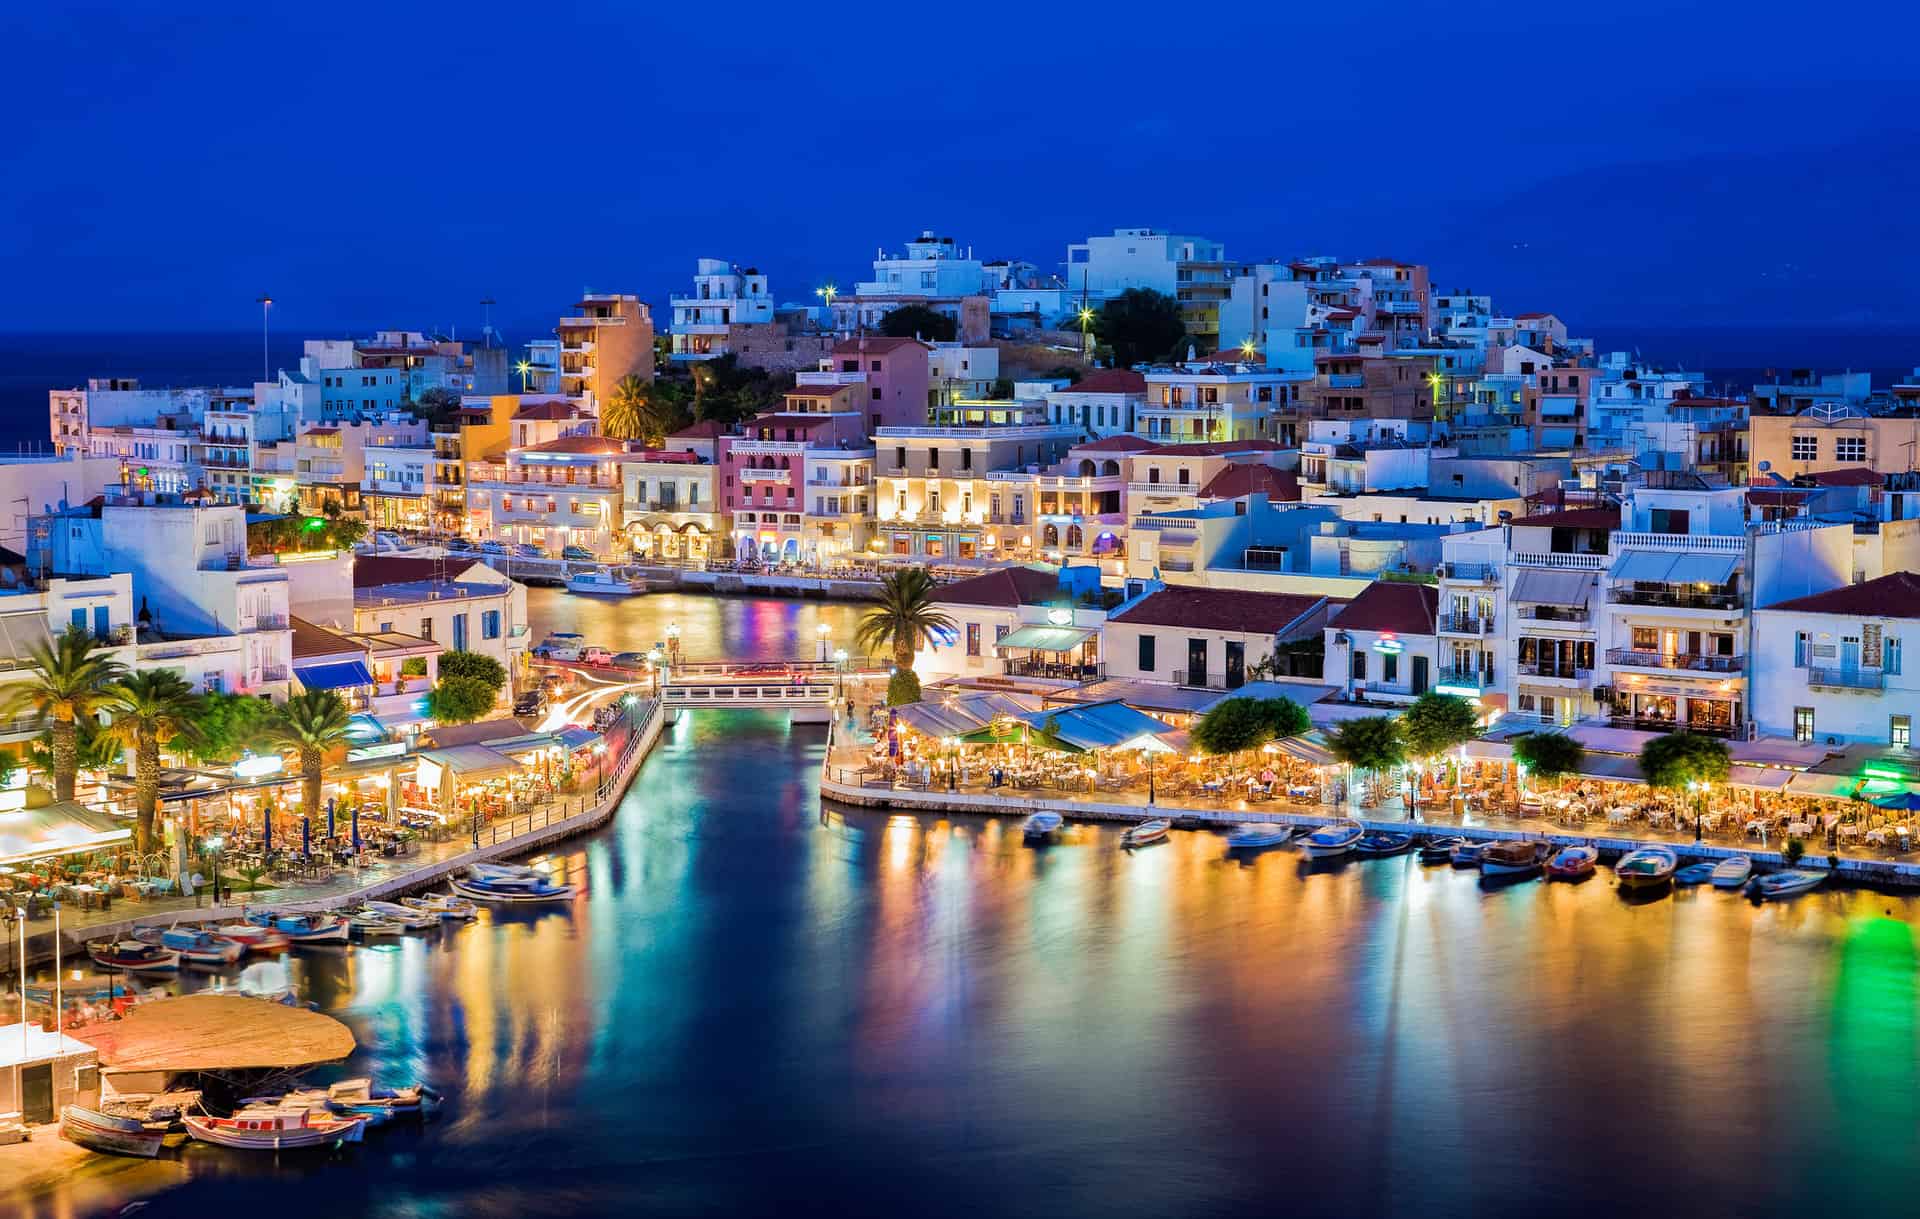 What's the best time to visit Greece?